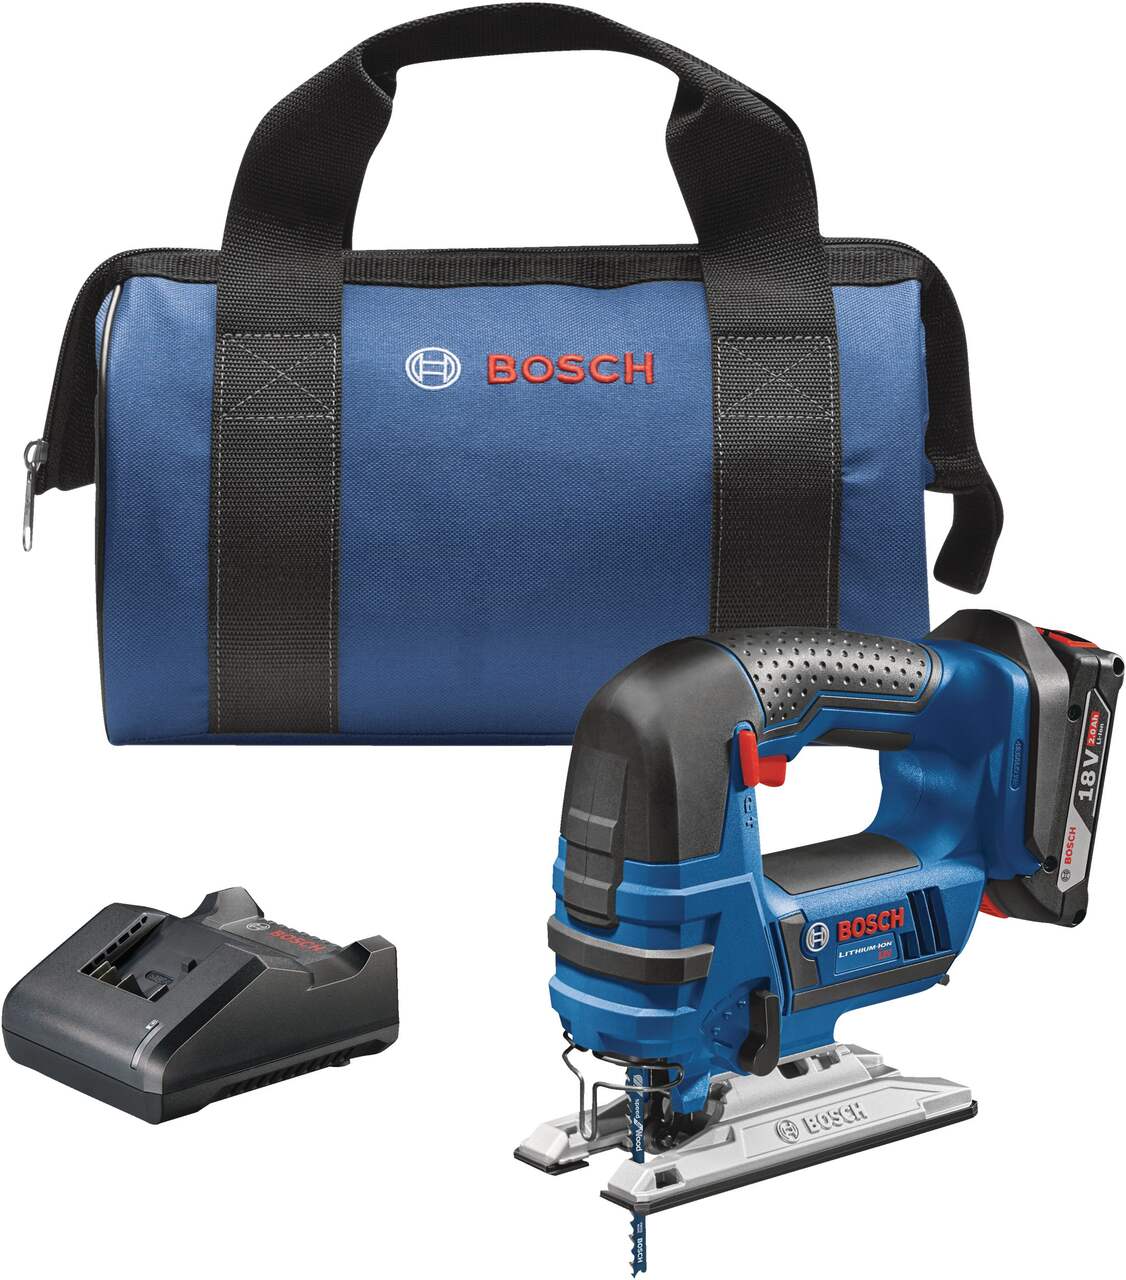 https://media-www.canadiantire.ca/product/fixing/tools/portable-power-tools/3997853/bosch-18v-jigsaw-kit-6a75ce6a-b0cd-46fa-a721-50e8241c7f37-jpgrendition.jpg?imdensity=1&imwidth=640&impolicy=mZoom